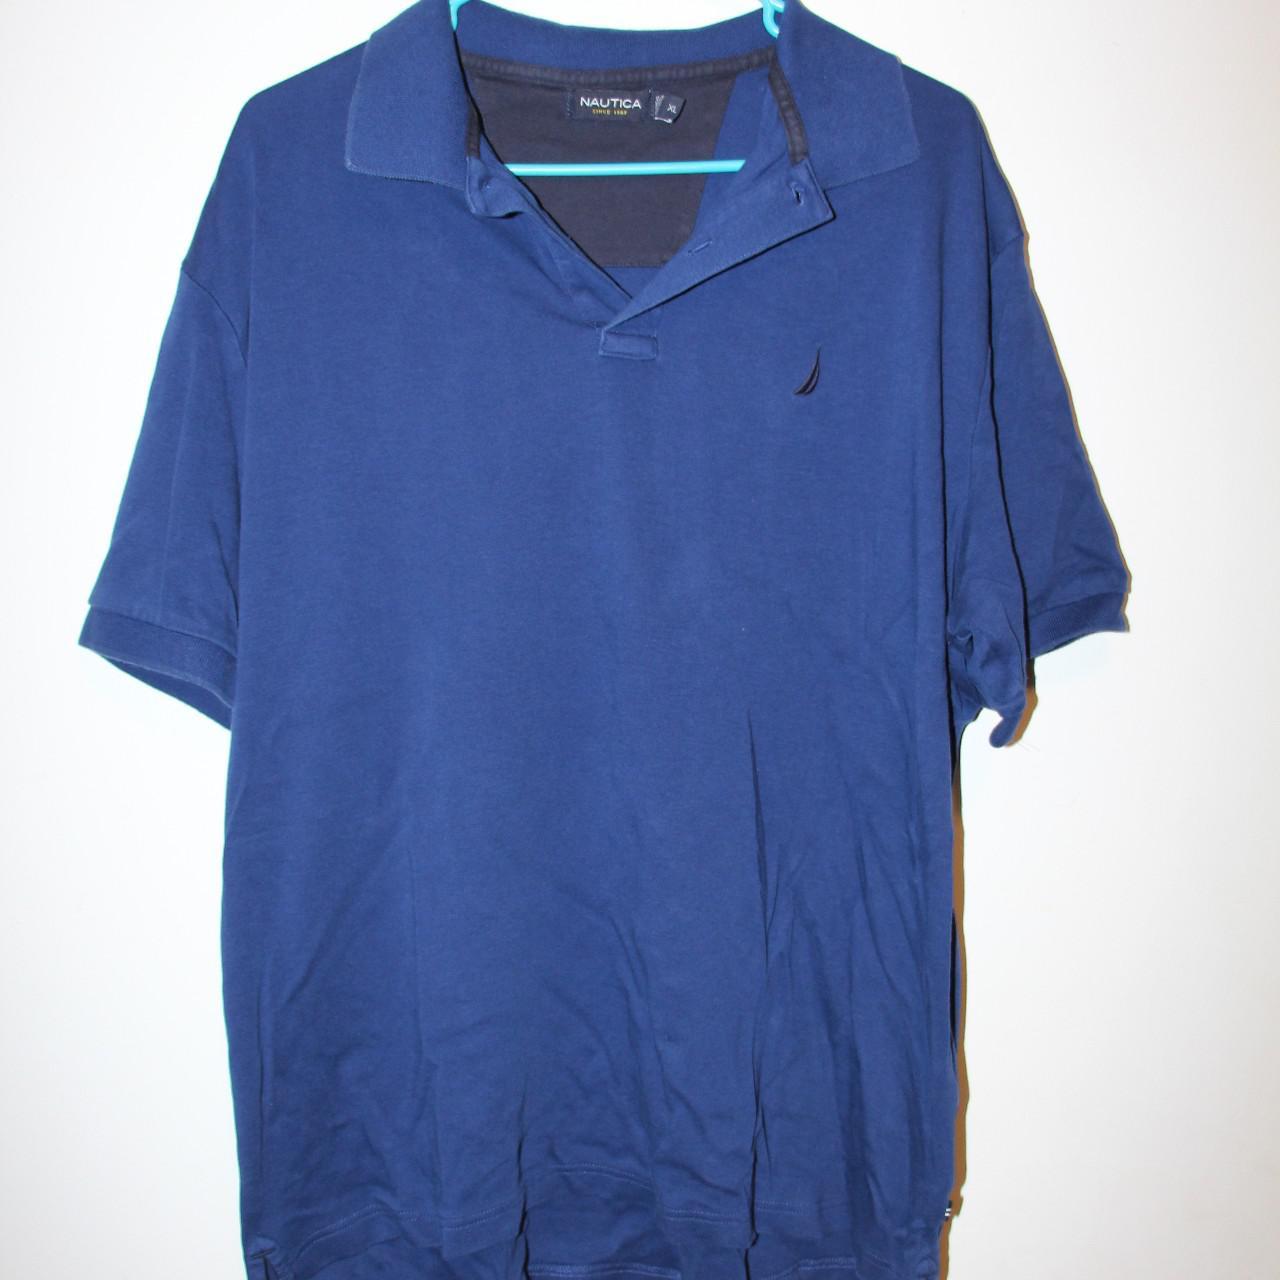 Product Image 1 - Dark Blue Polo Shirt
Great Condition